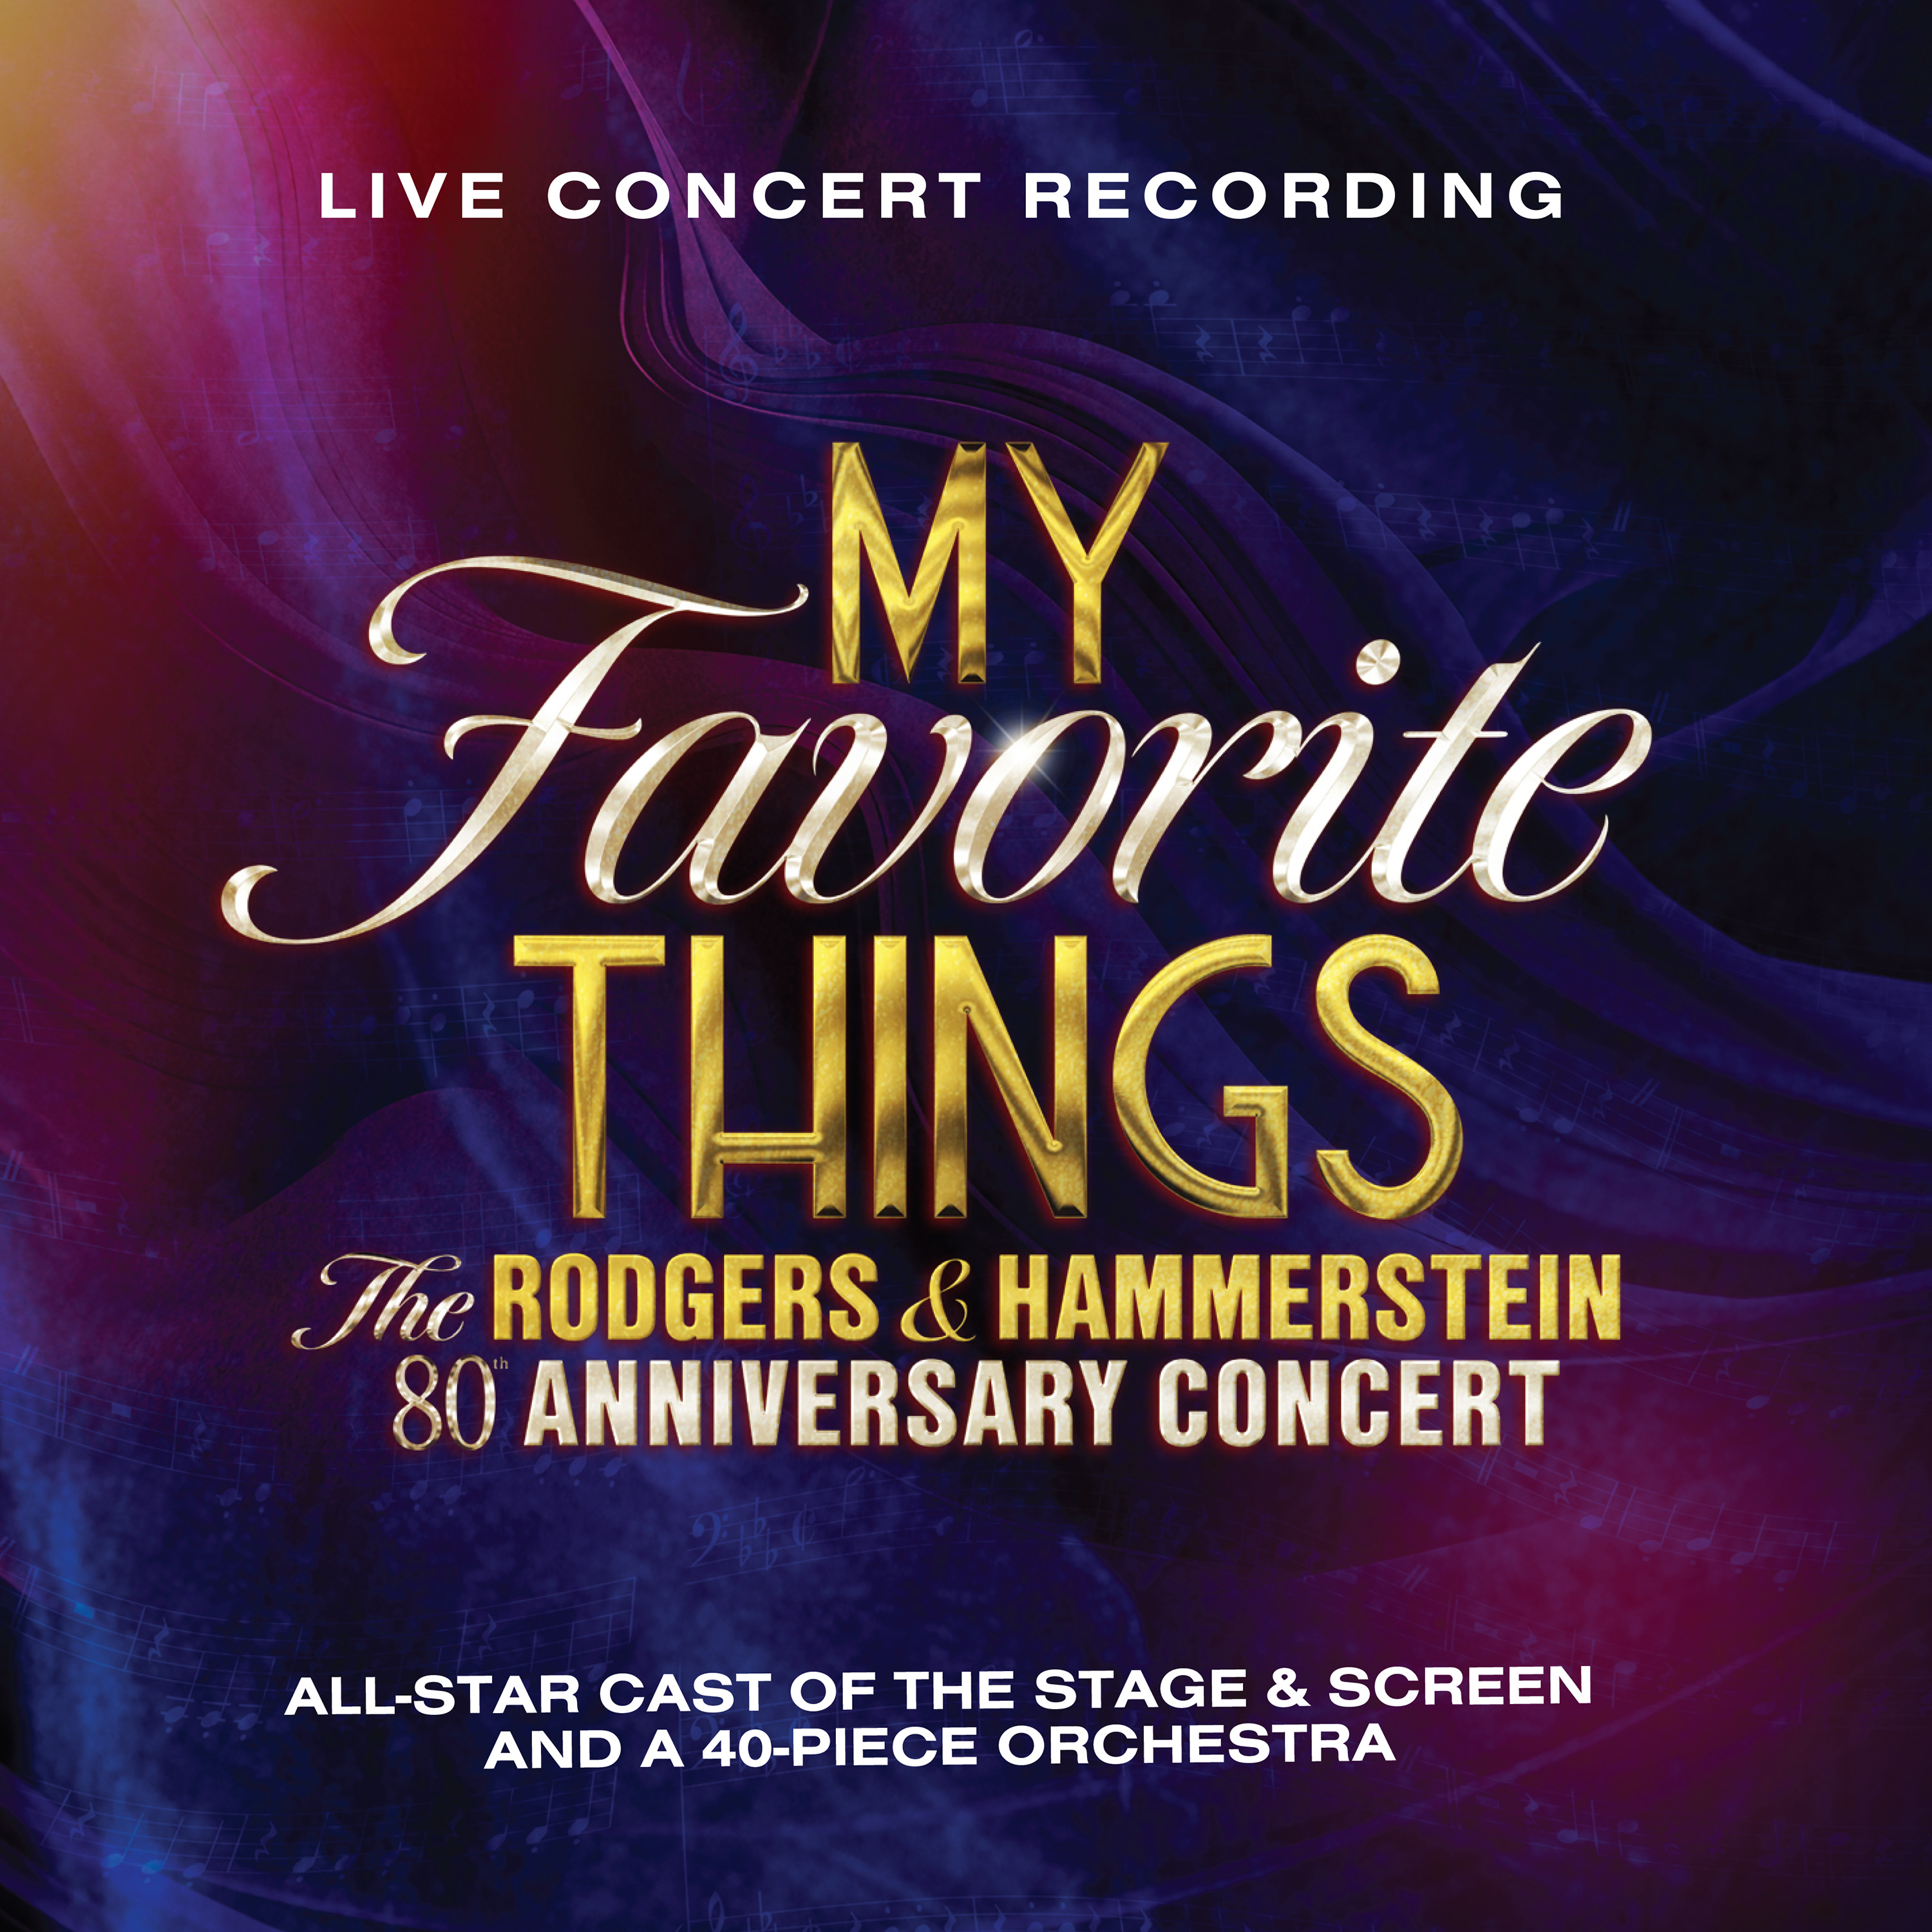 My Favorite Things: The Rodgers & Hammerstein 80th Anniversary Concert Album